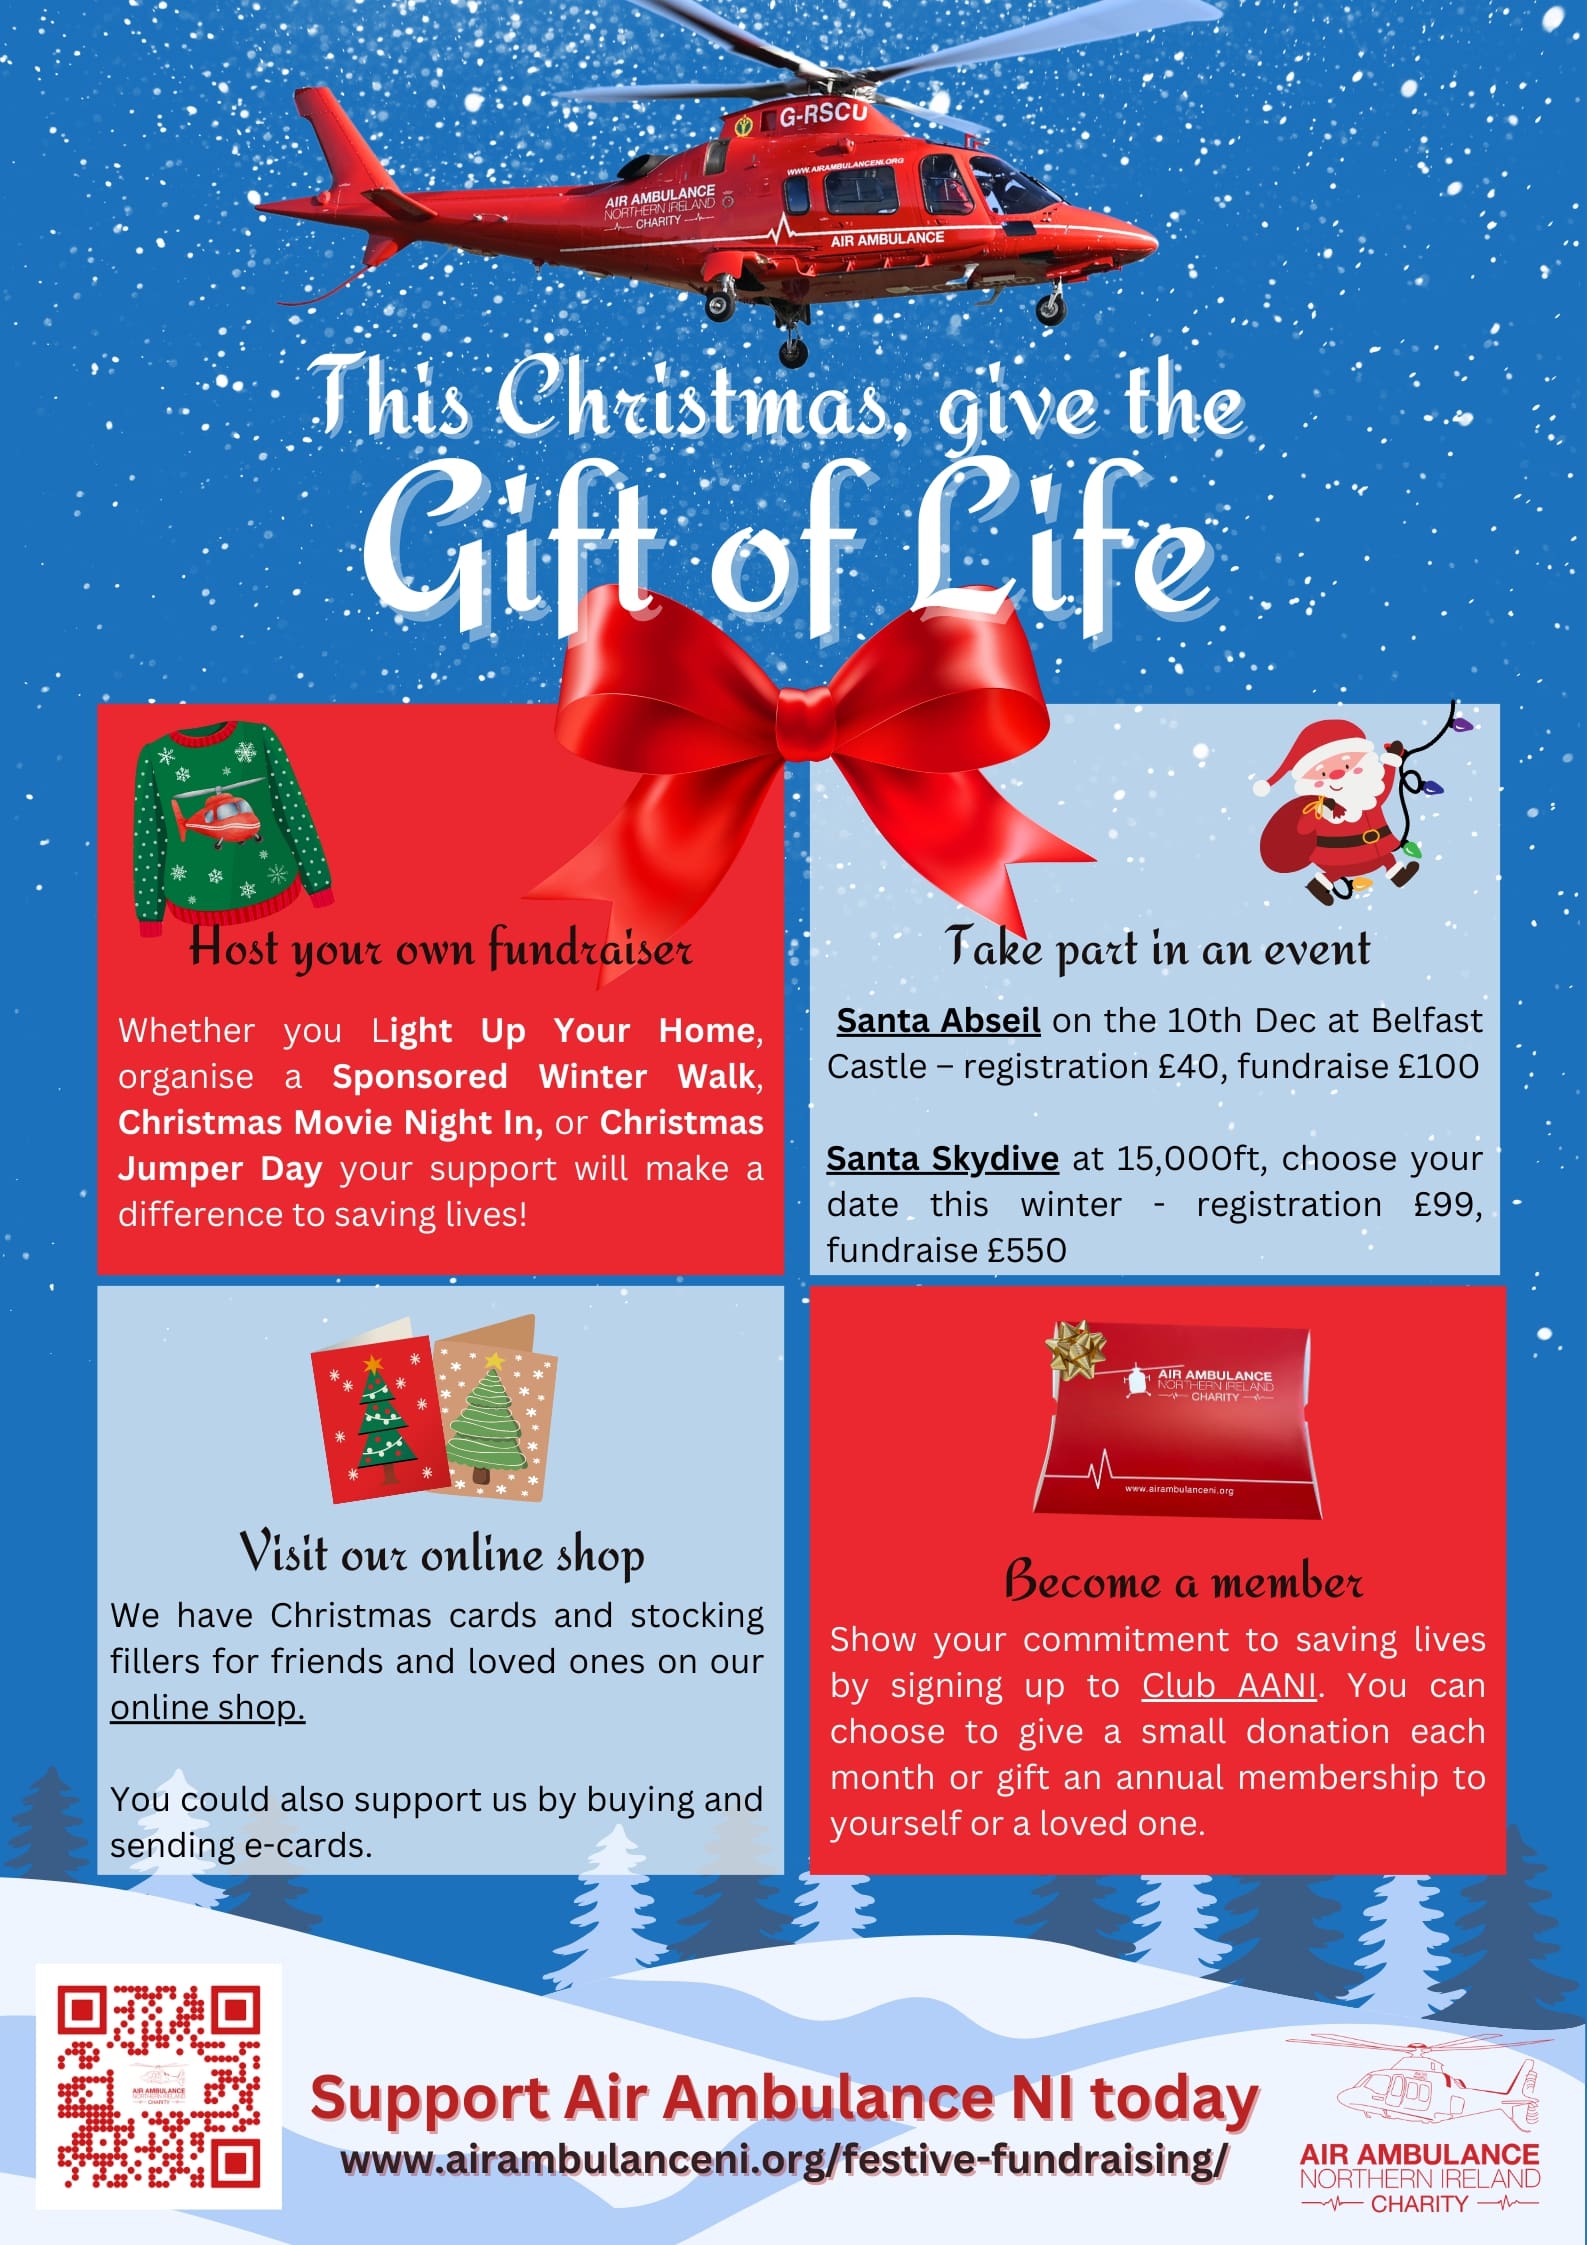 Air Ambulance appeals for the gift of life this Christmas!